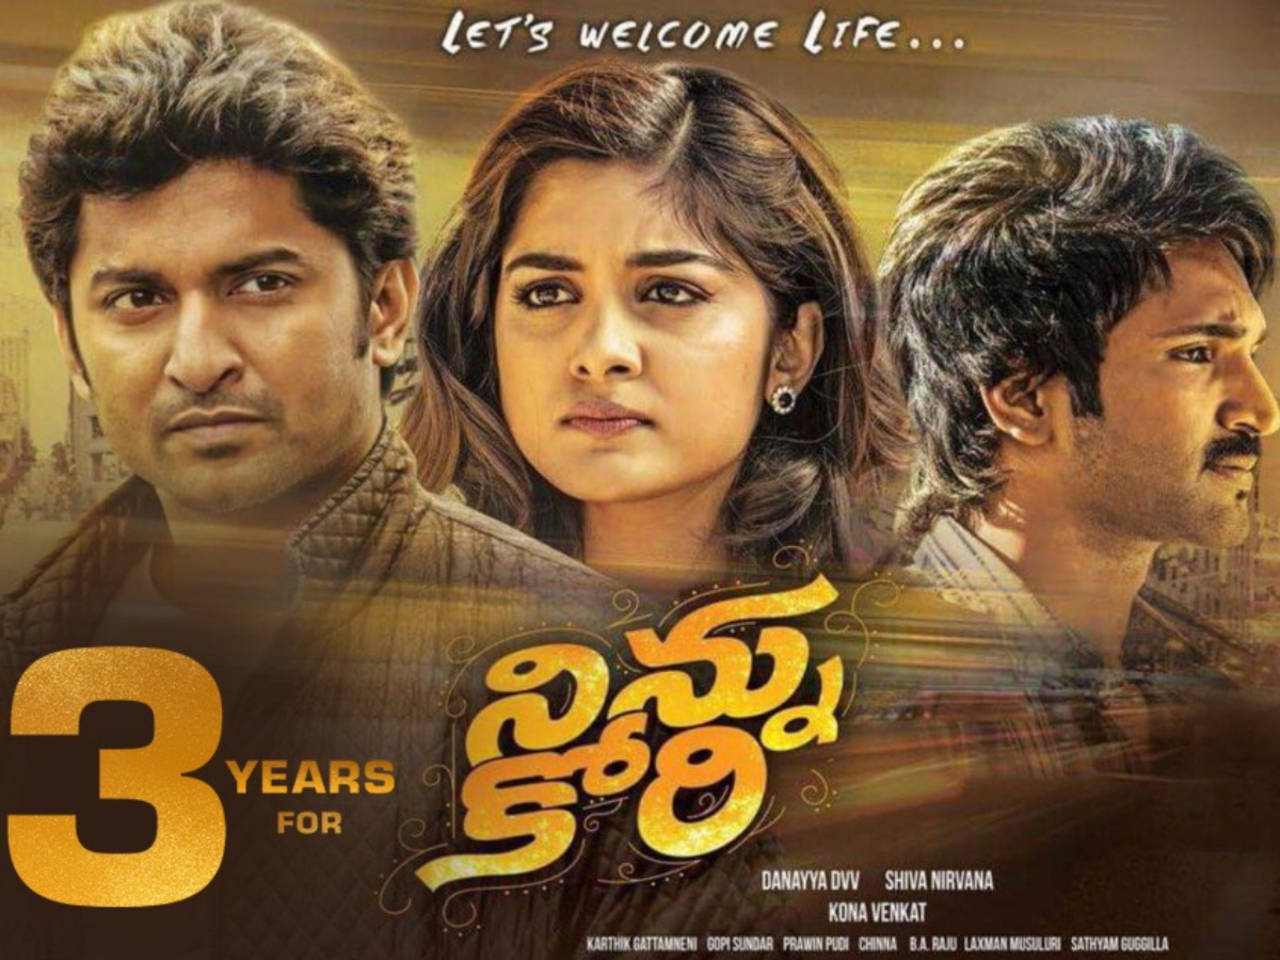 Ninnu Kori completes 3 years: Shiva Nirvana reminisces about the ...